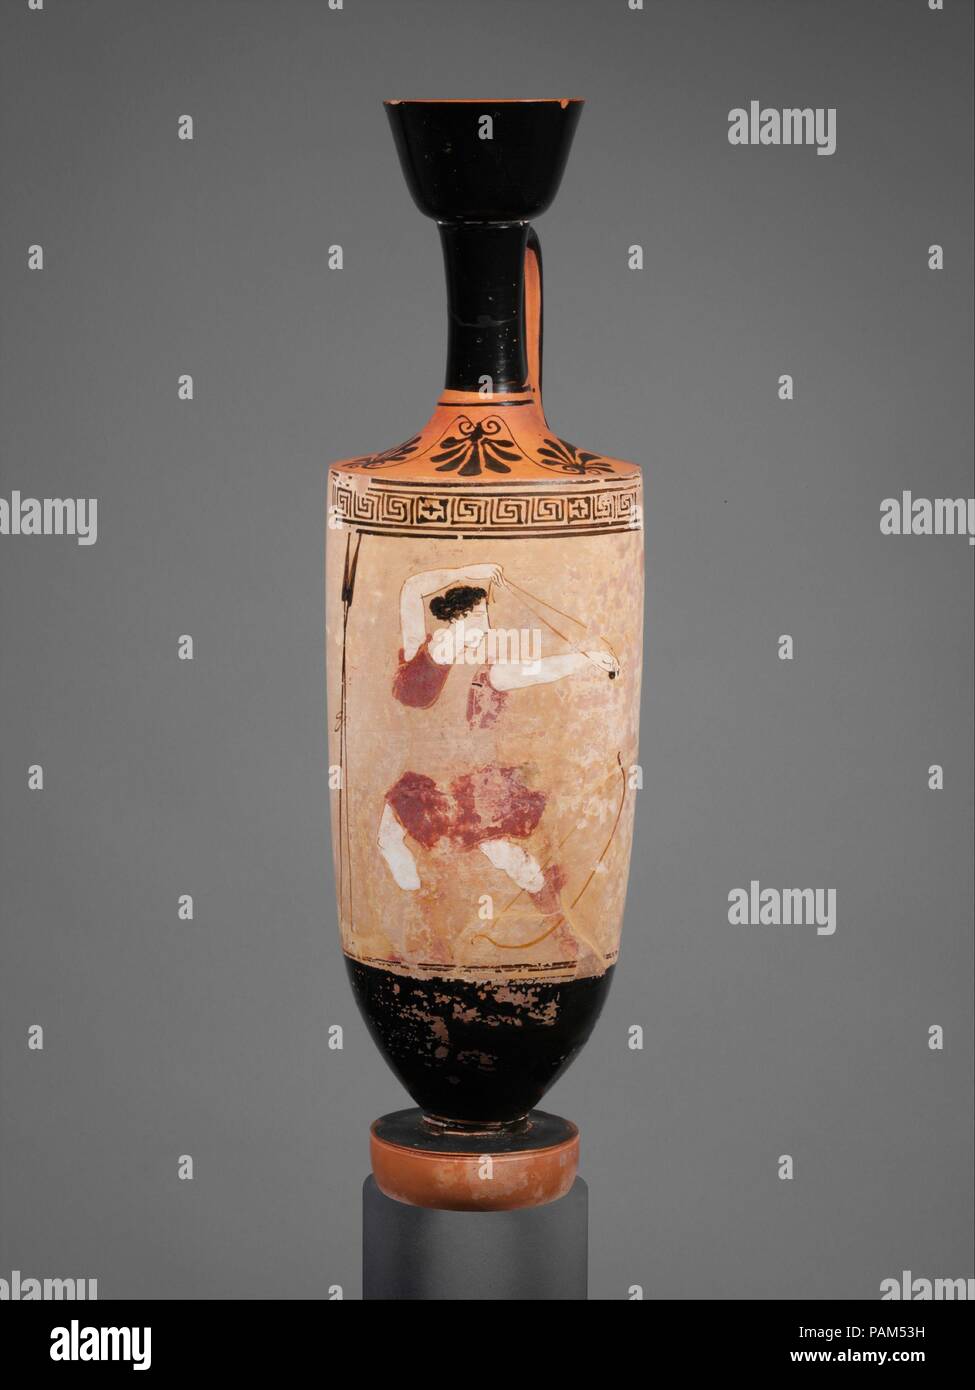 Terracotta lekythos (oil flask). Culture: Greek, Attic. Dimensions: H. 12 7/8 in. (32.7 cm). Date: ca. 440 B.C..  Amazon using a slingshot  The Klügmann Painter is distinguished from his contemporaries by his depictions of mythological figures and scenes from daily life rather than funerary subjects. Museum: Metropolitan Museum of Art, New York, USA. Stock Photo